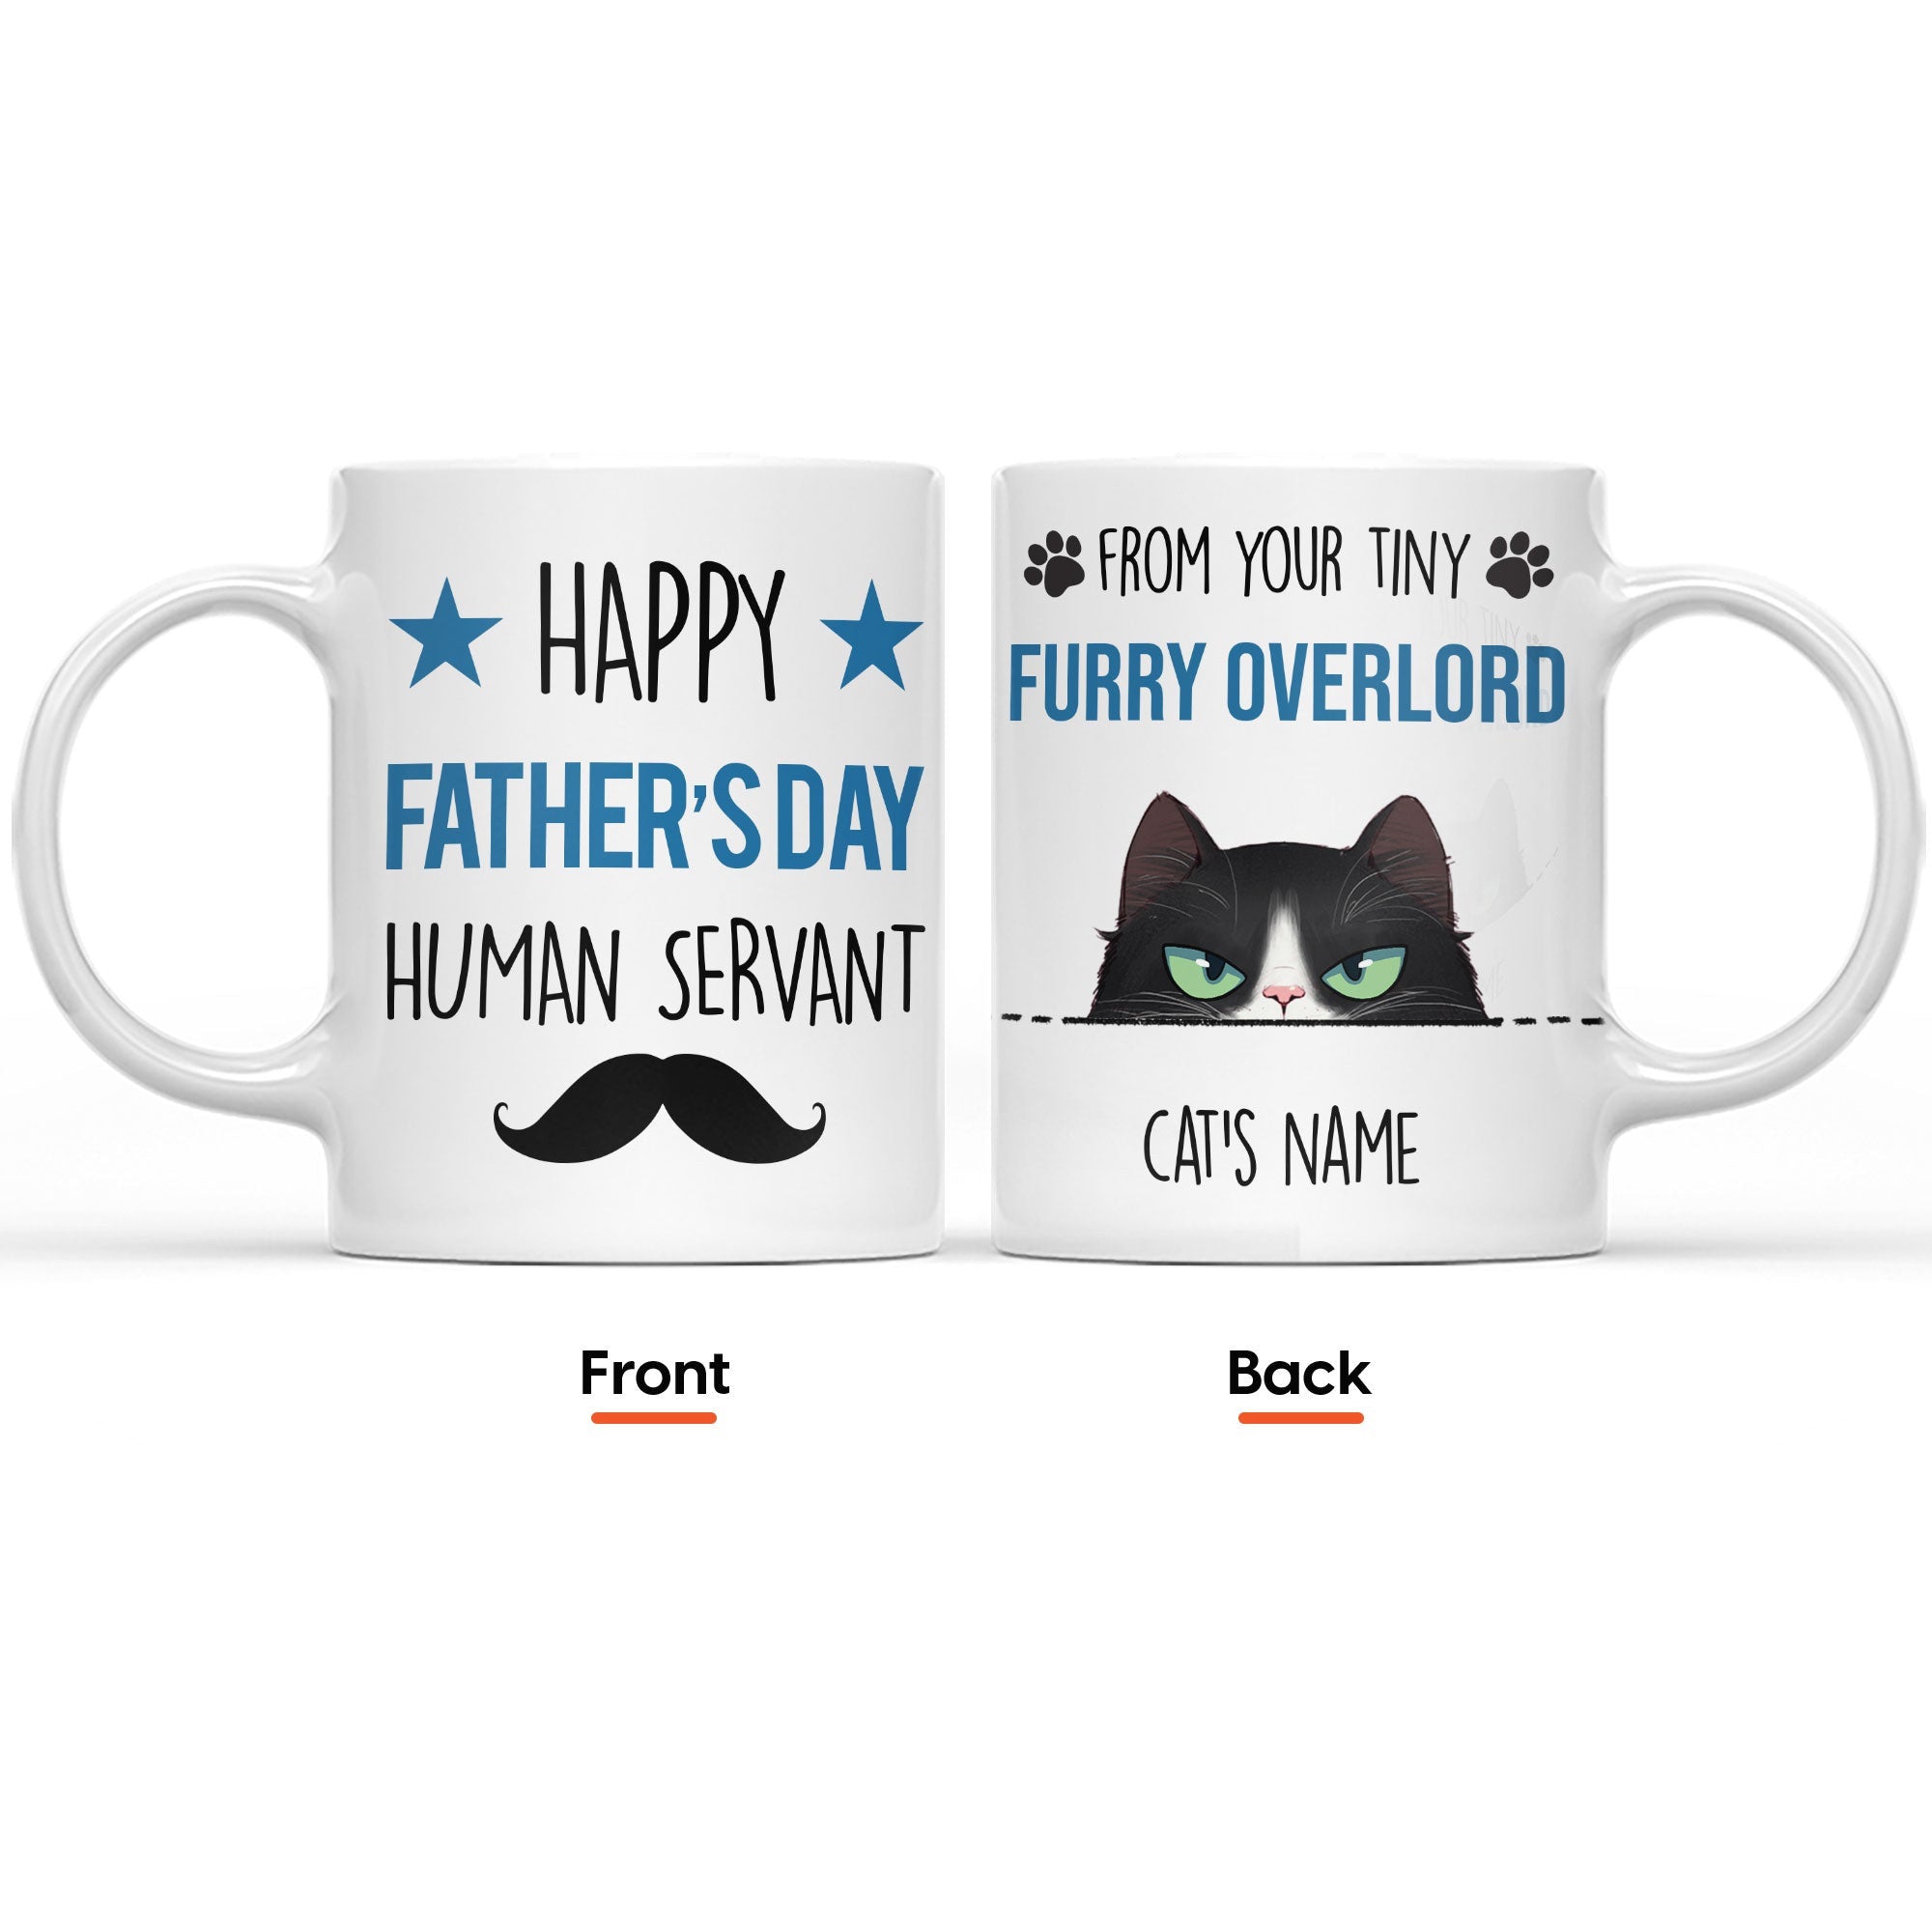 Your Tiny Furry Overlords - Personalized Mug - Father's Day Gift For Cat Dad  - Peeking Cats